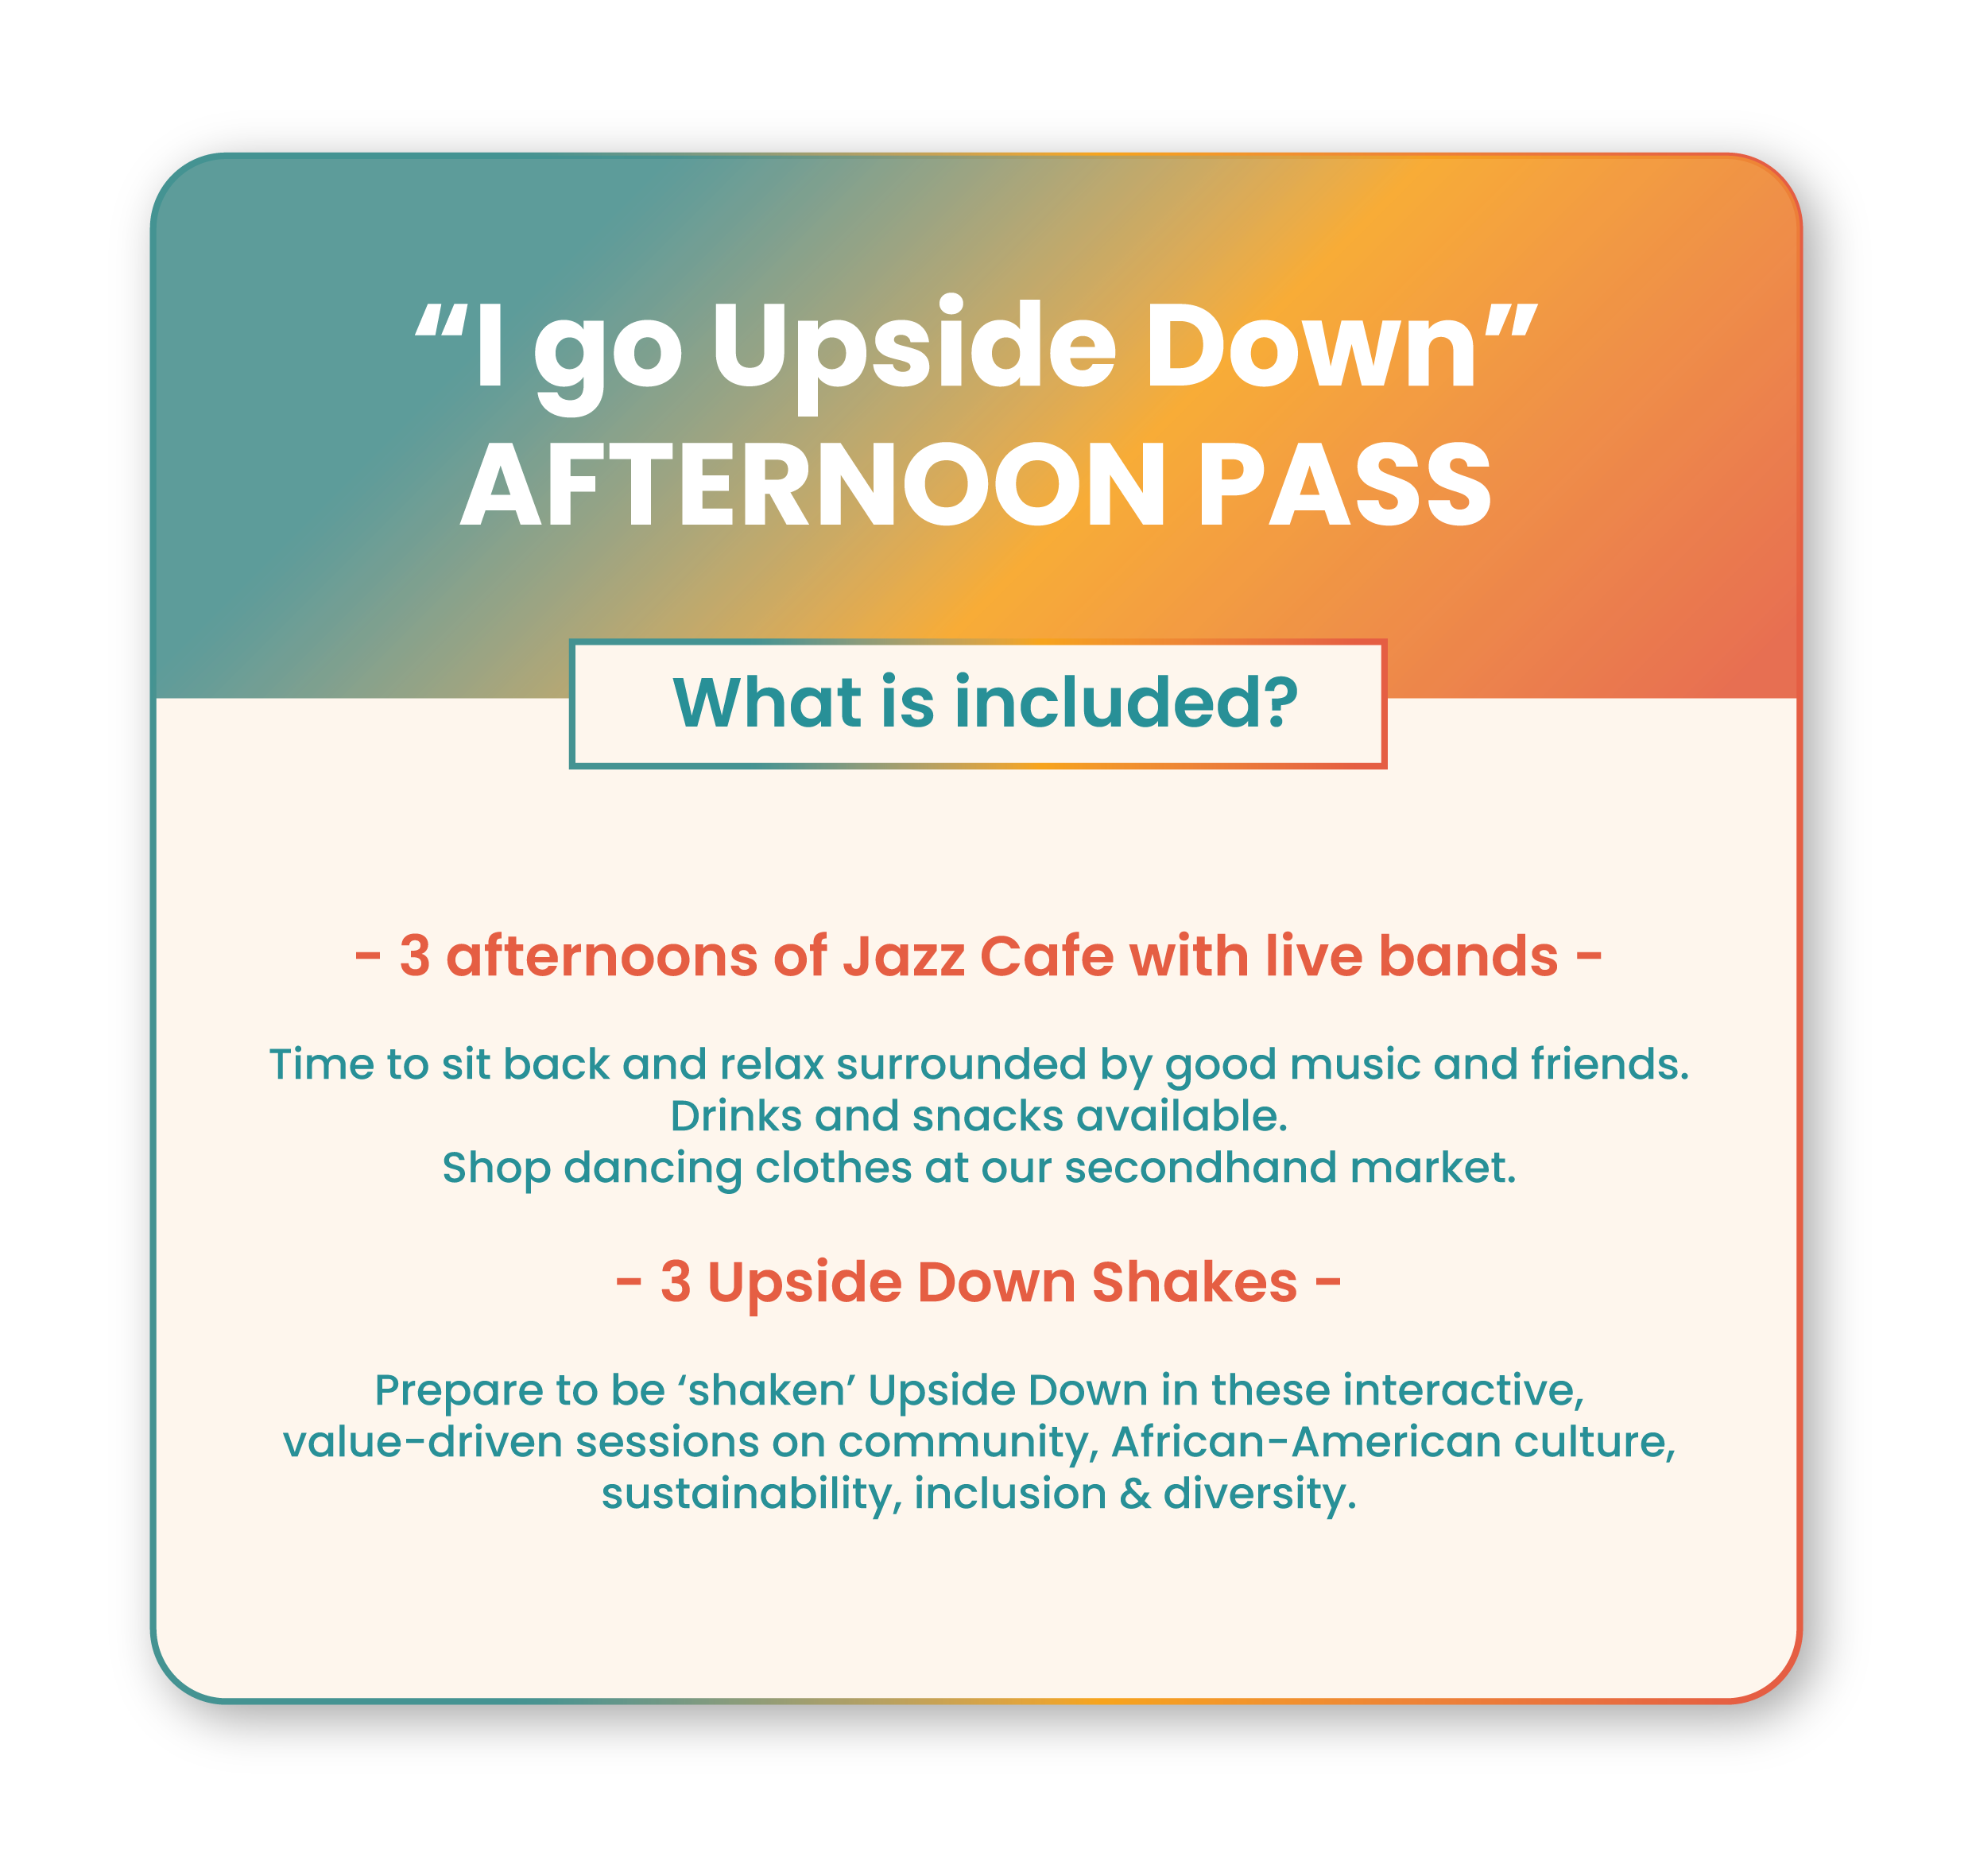 UDF afternoon pass included